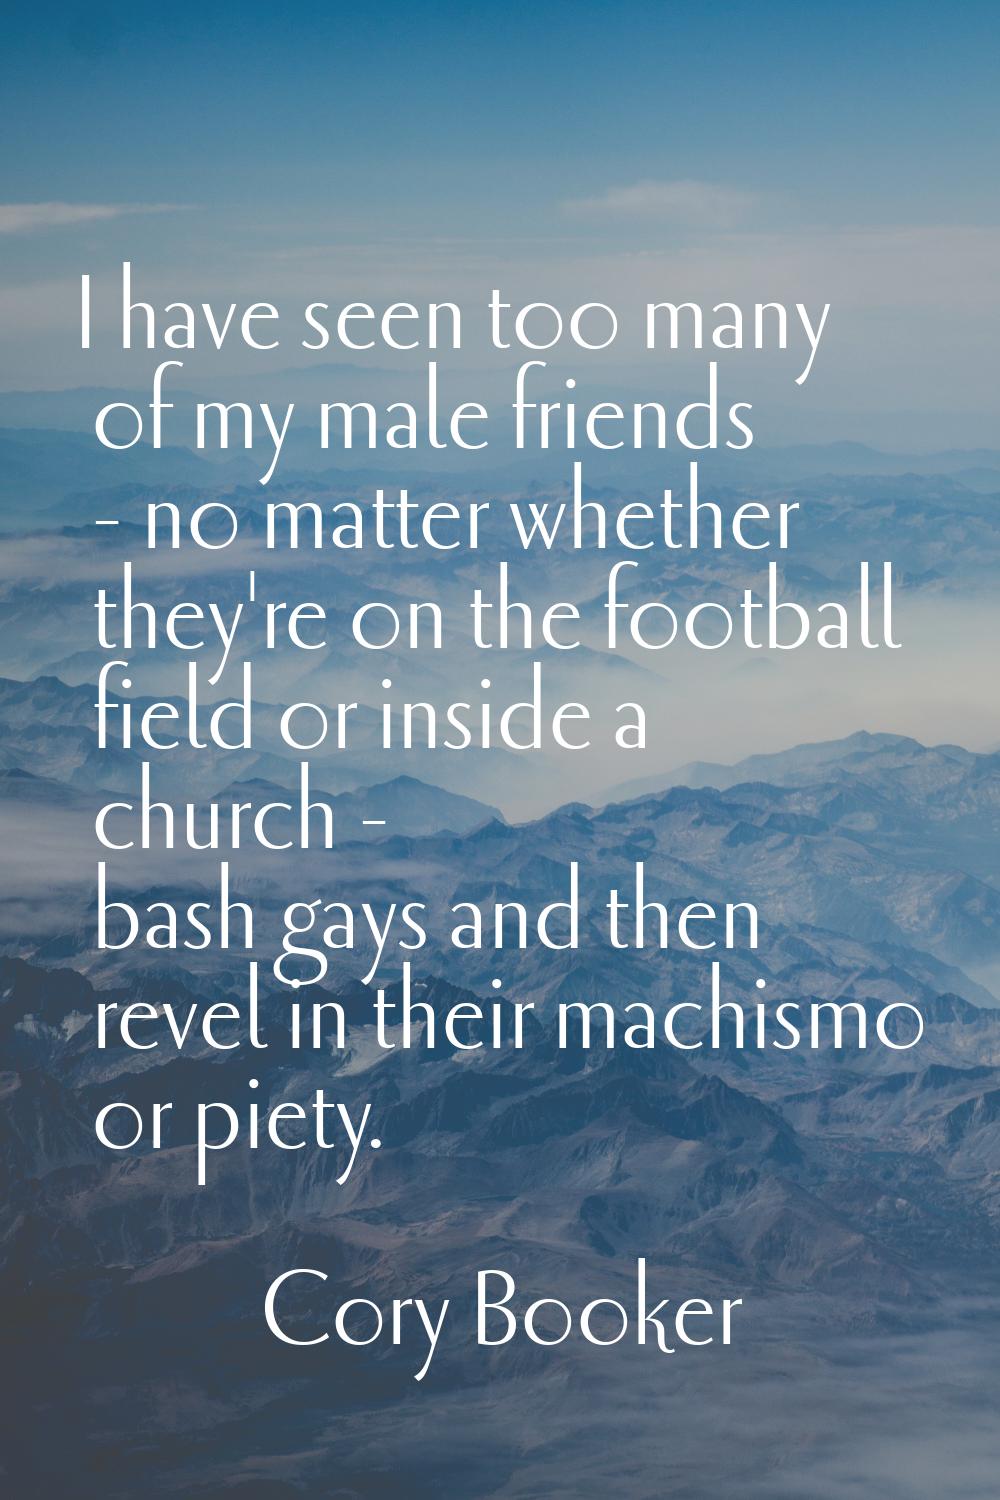 I have seen too many of my male friends - no matter whether they're on the football field or inside